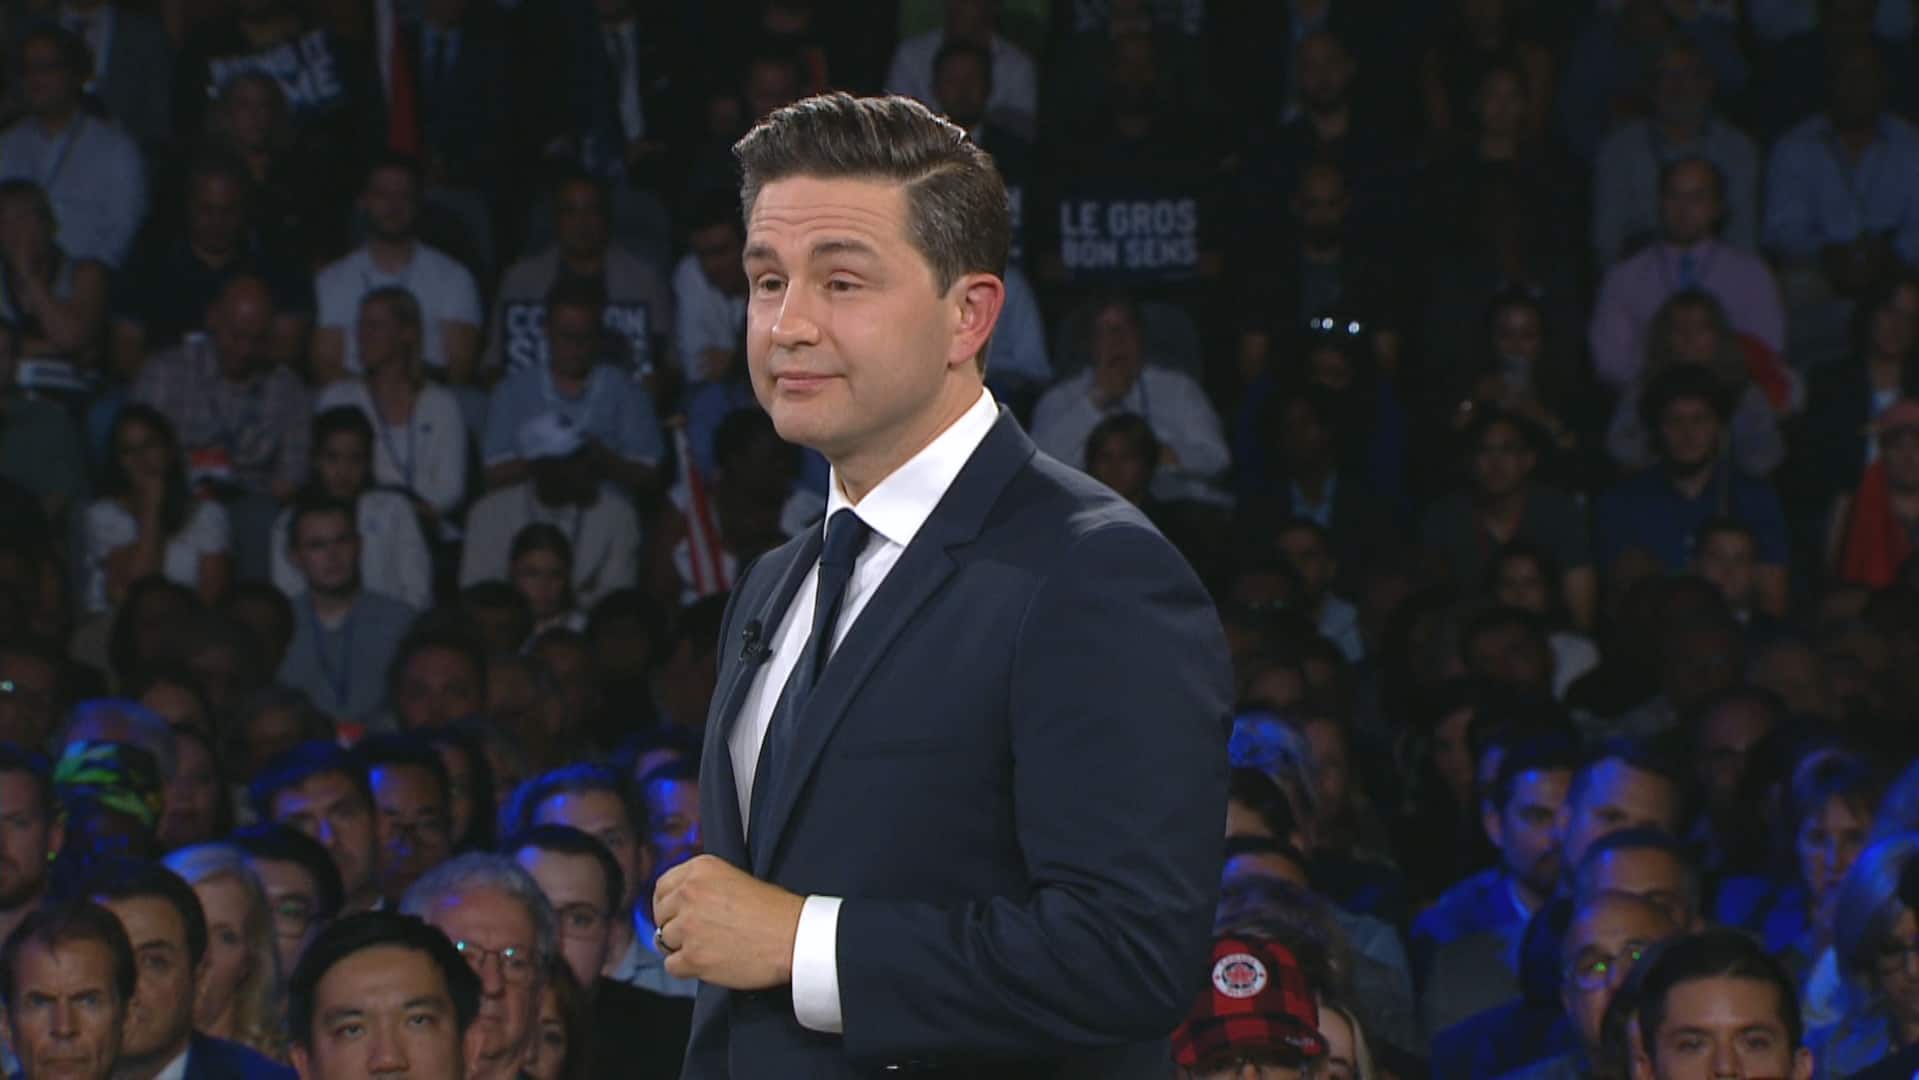 poilievre invokes former liberal prime ministers fiscal records in speech at conservative convention